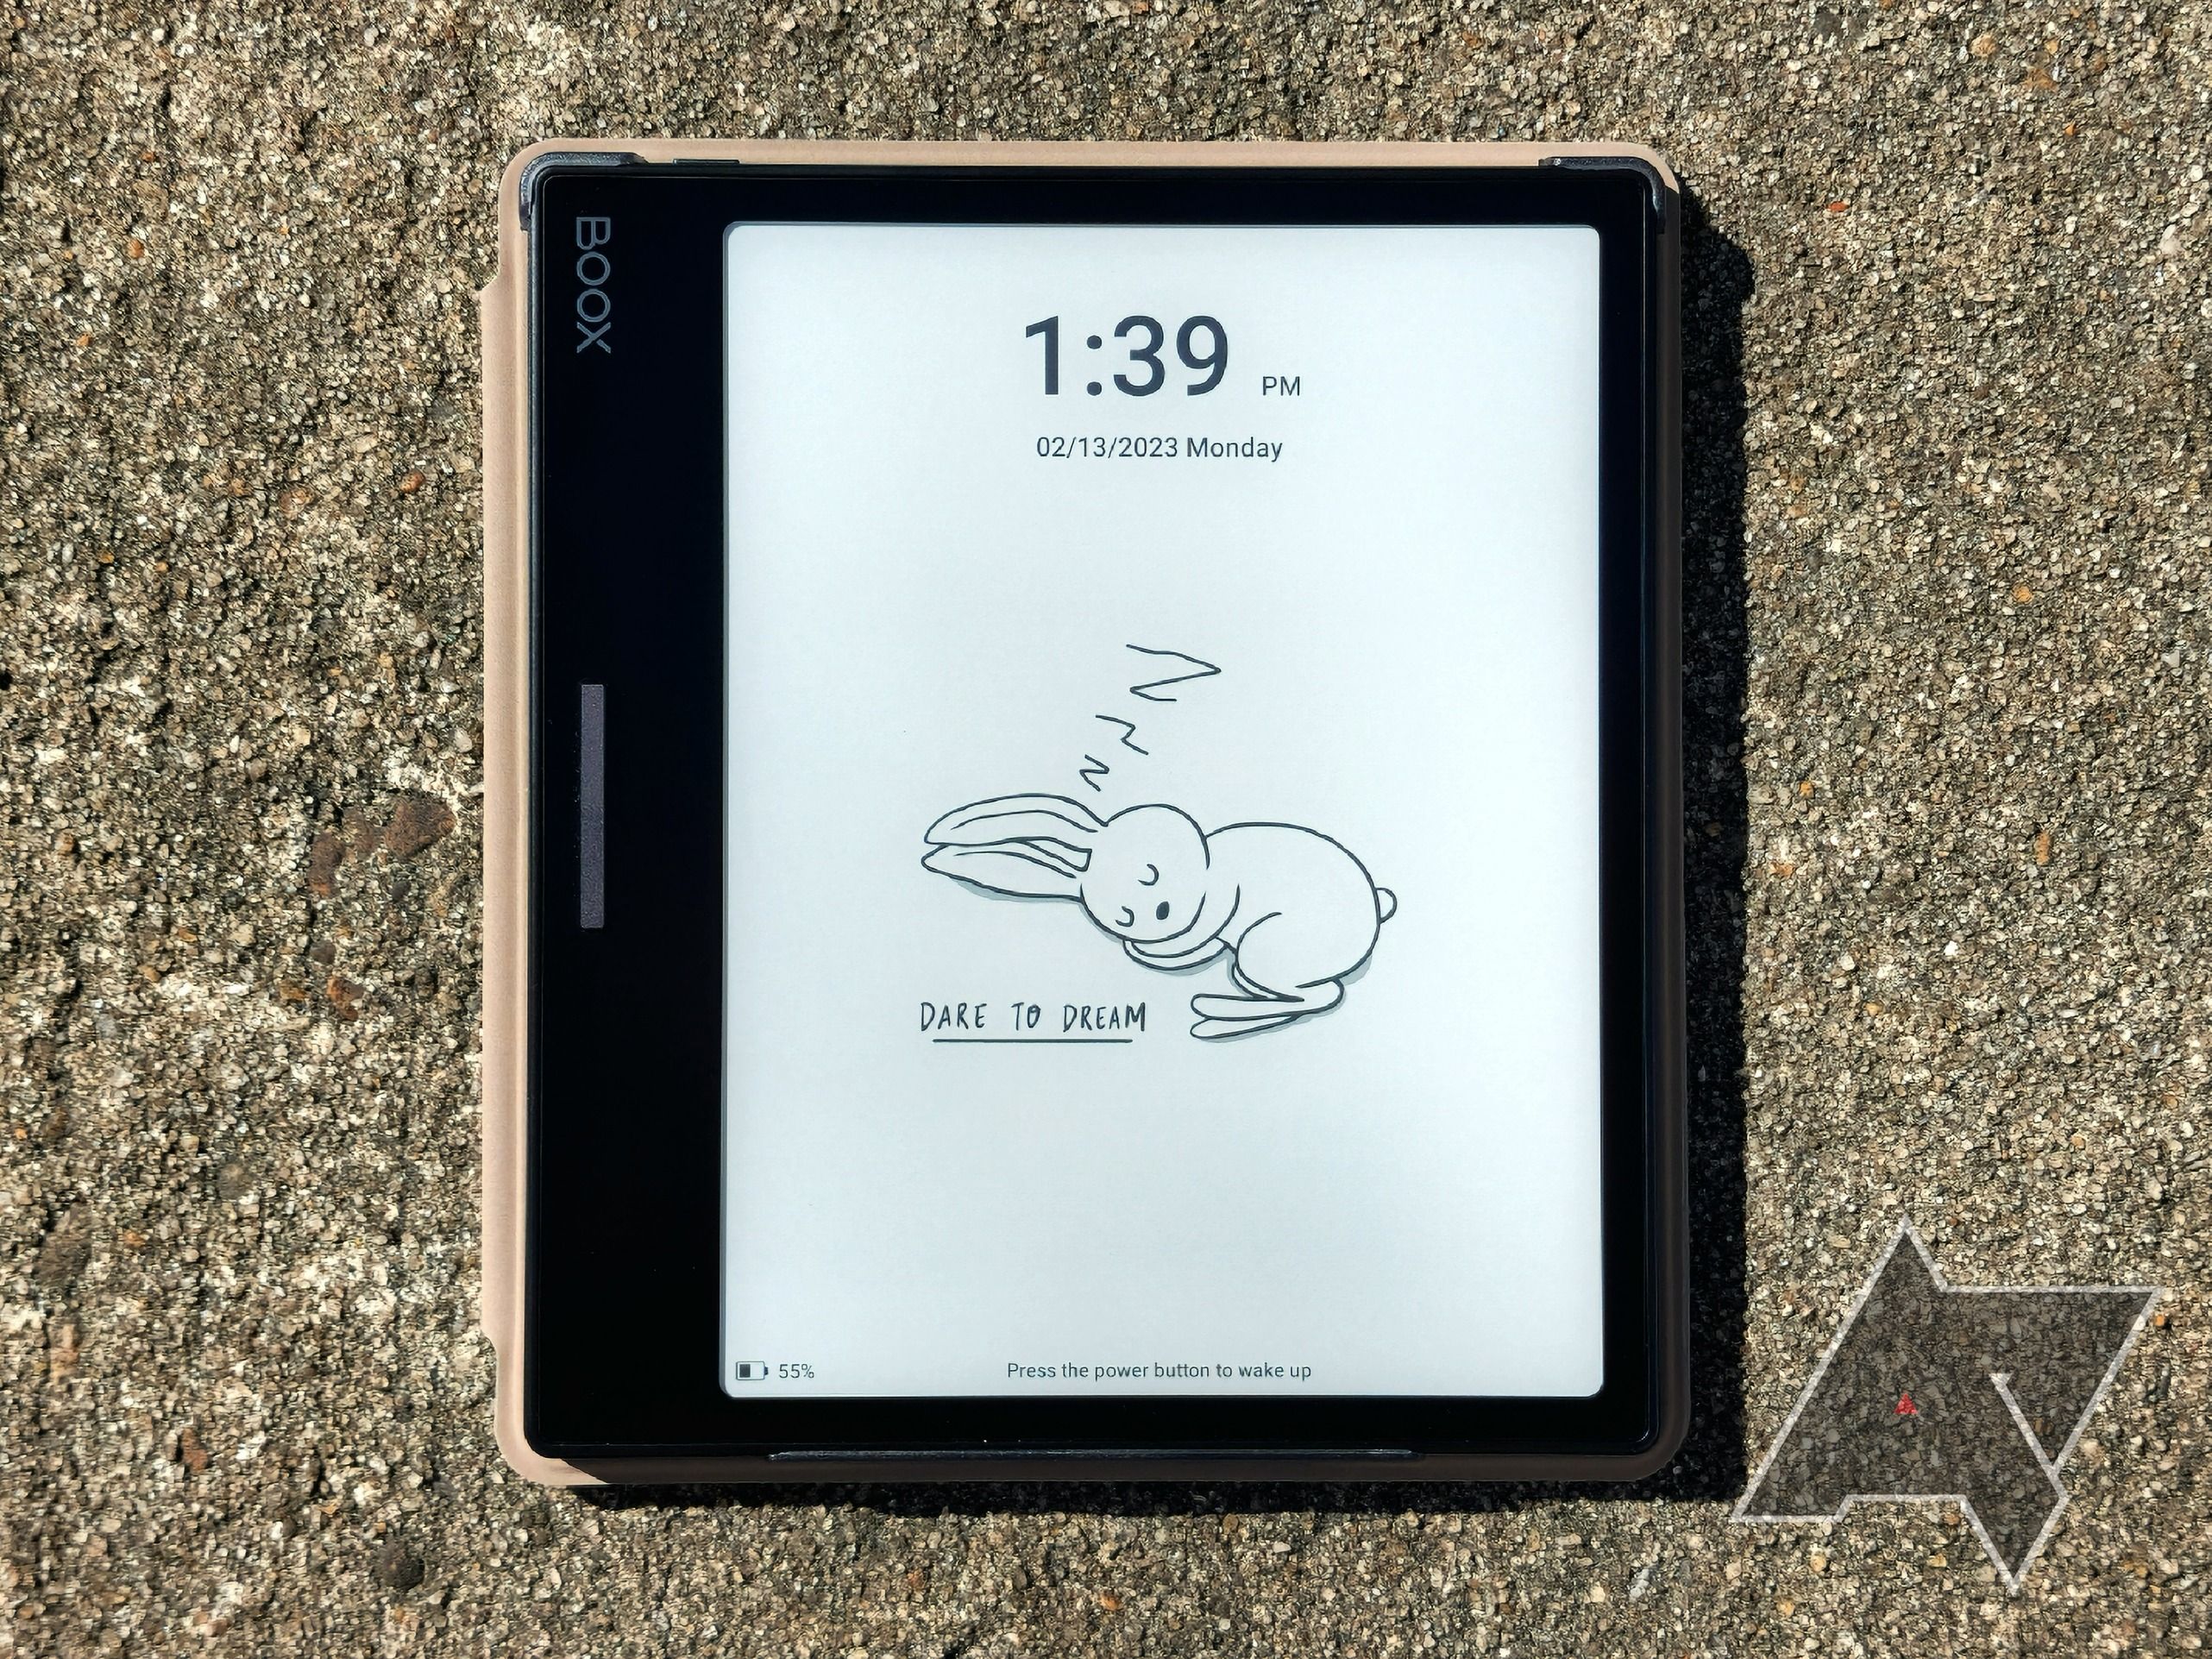 Onyx Boox Leaf Review – A solid e-reader with Google Play - Good e-Reader